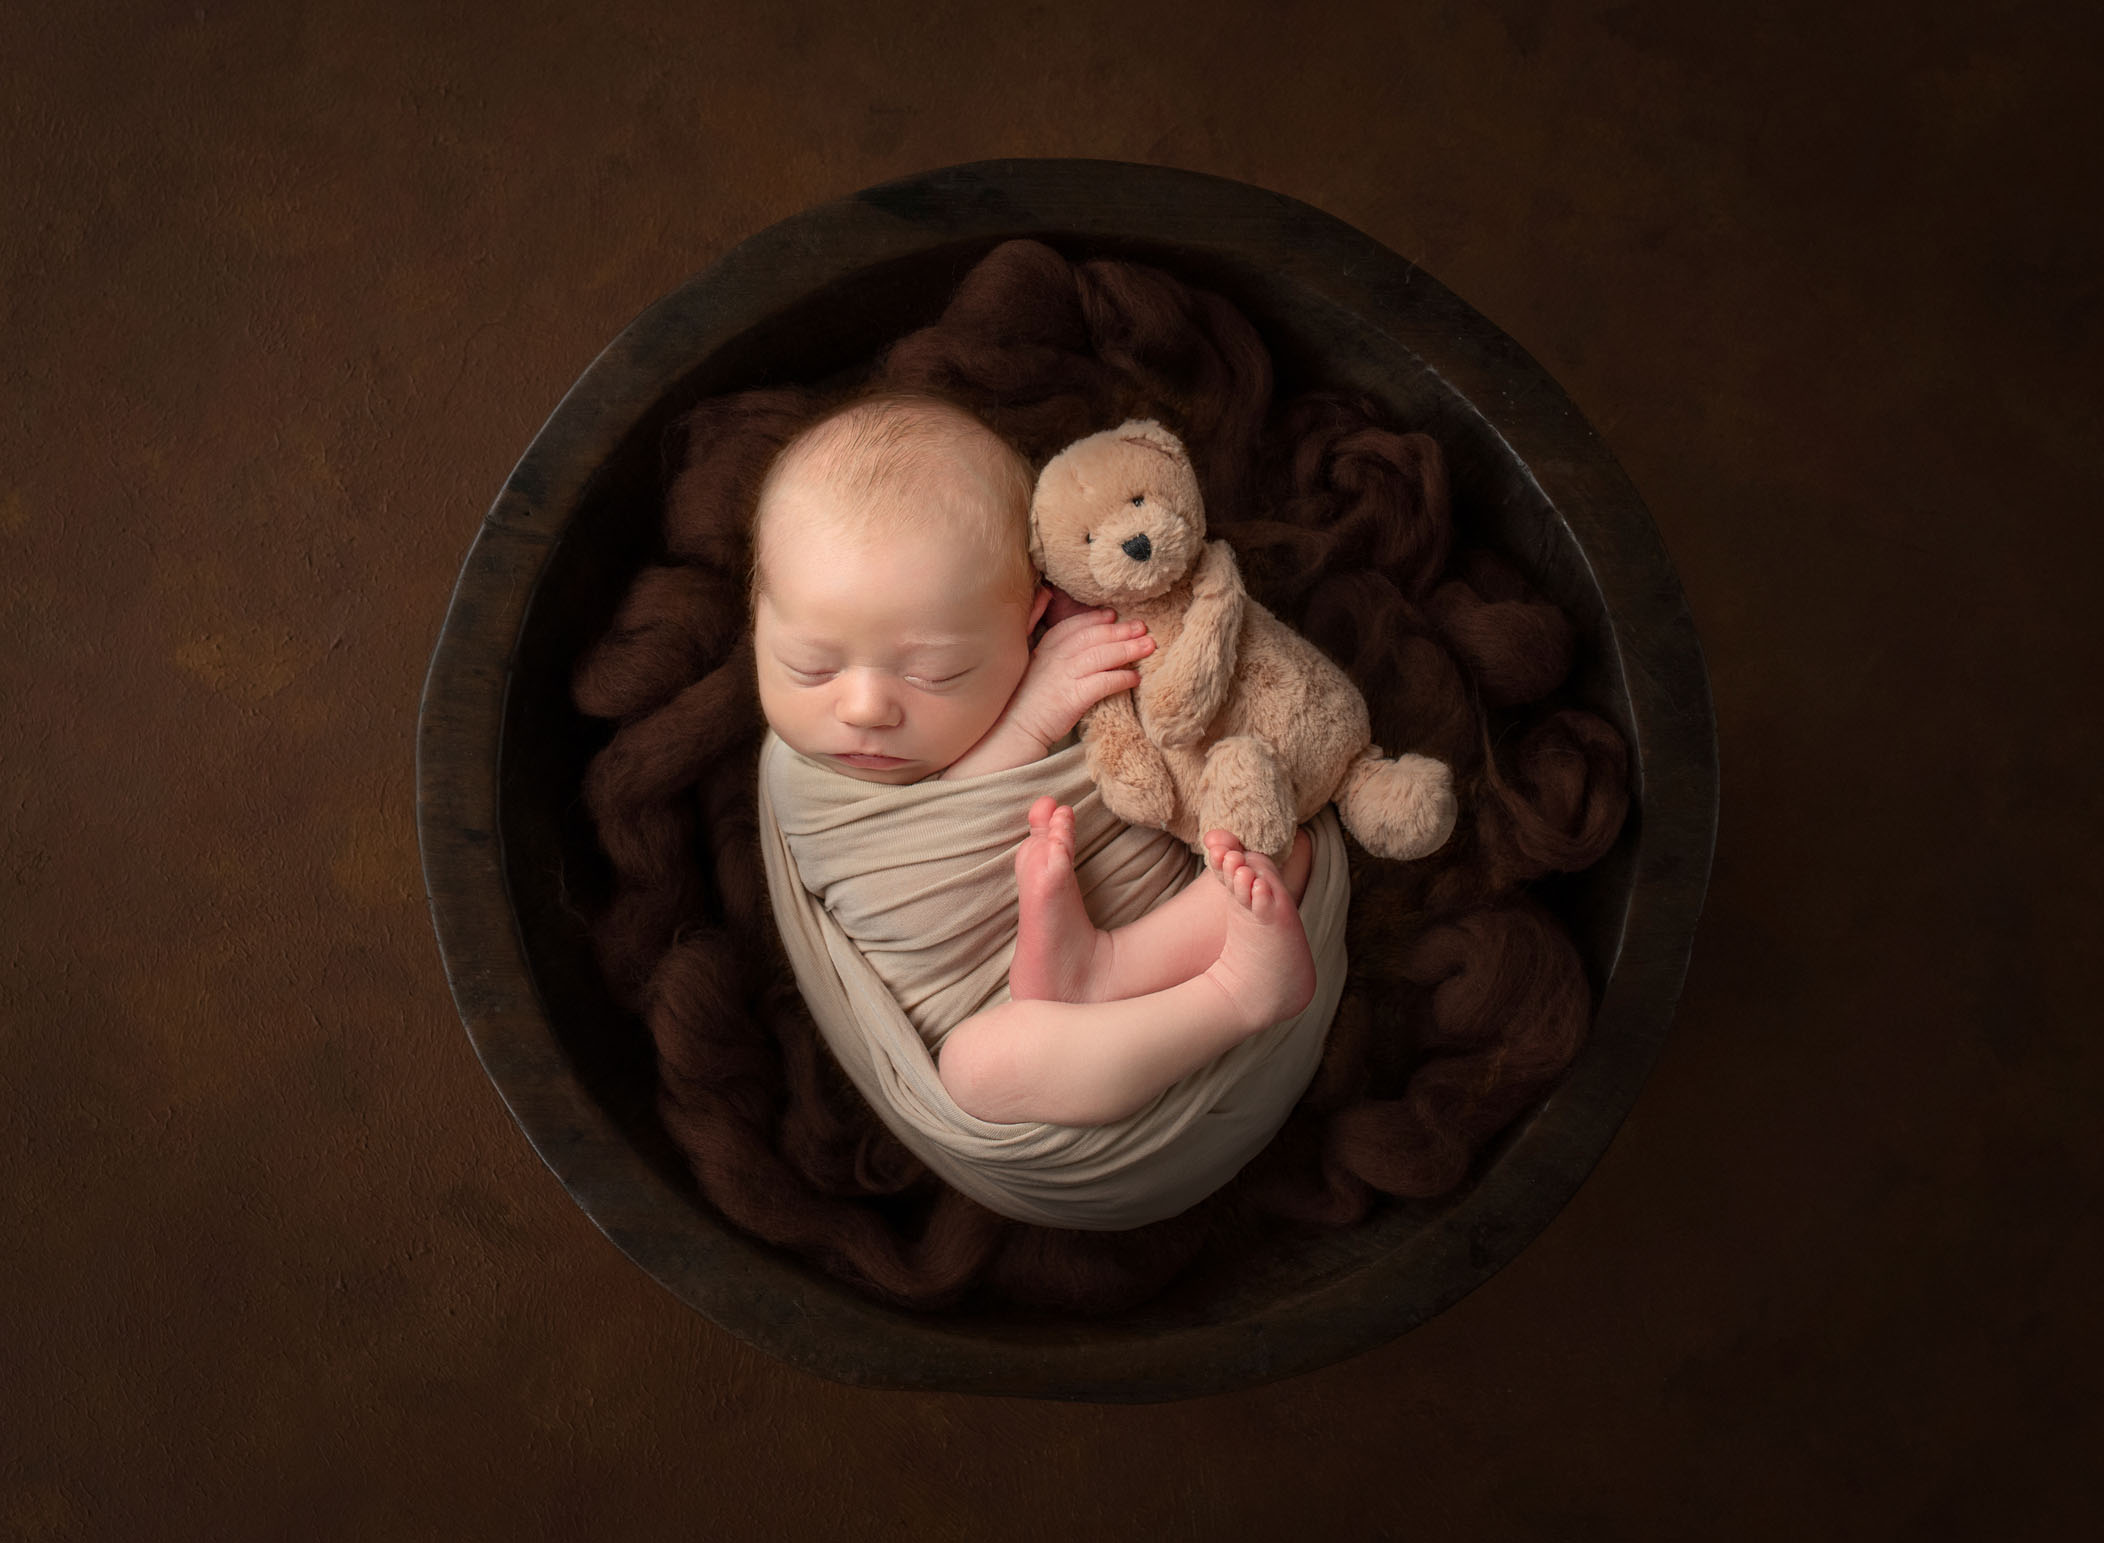 Newborn baby and his teddy bear sleeping in a bowl swaddled